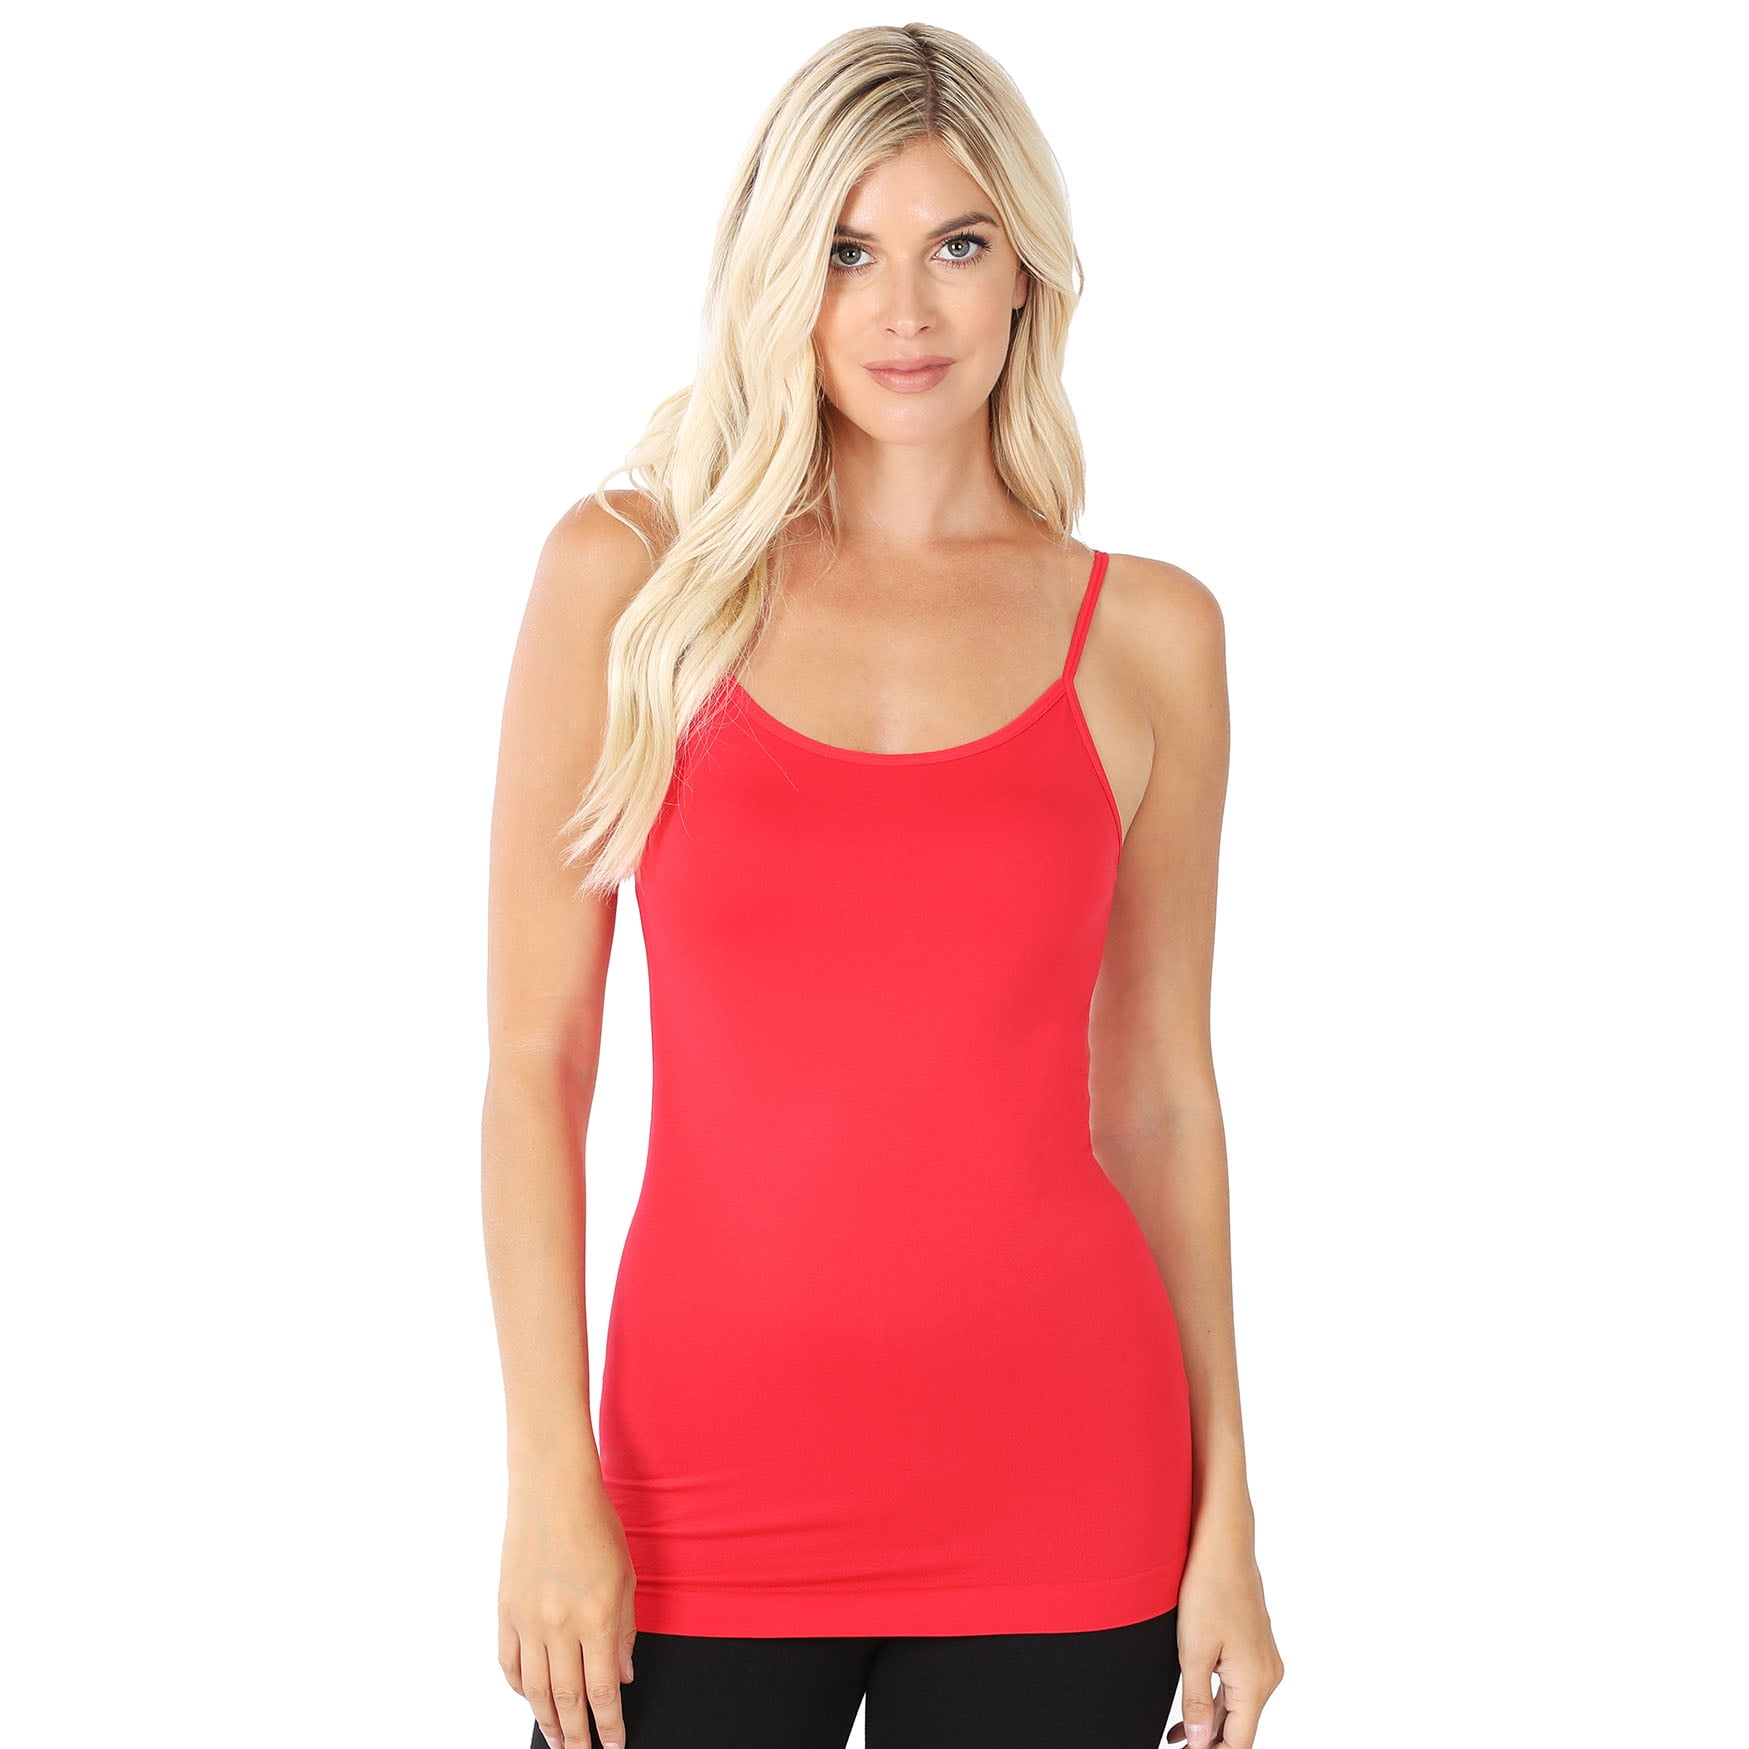 Women's Solid Seamless Traditional Tank Slip Dress. - Round Neckline -  Sleeveless - Long Camisole - Mini Dress - Body Contouring - Figure Hugging  - Solid Color - Comfortable - Super Soft 